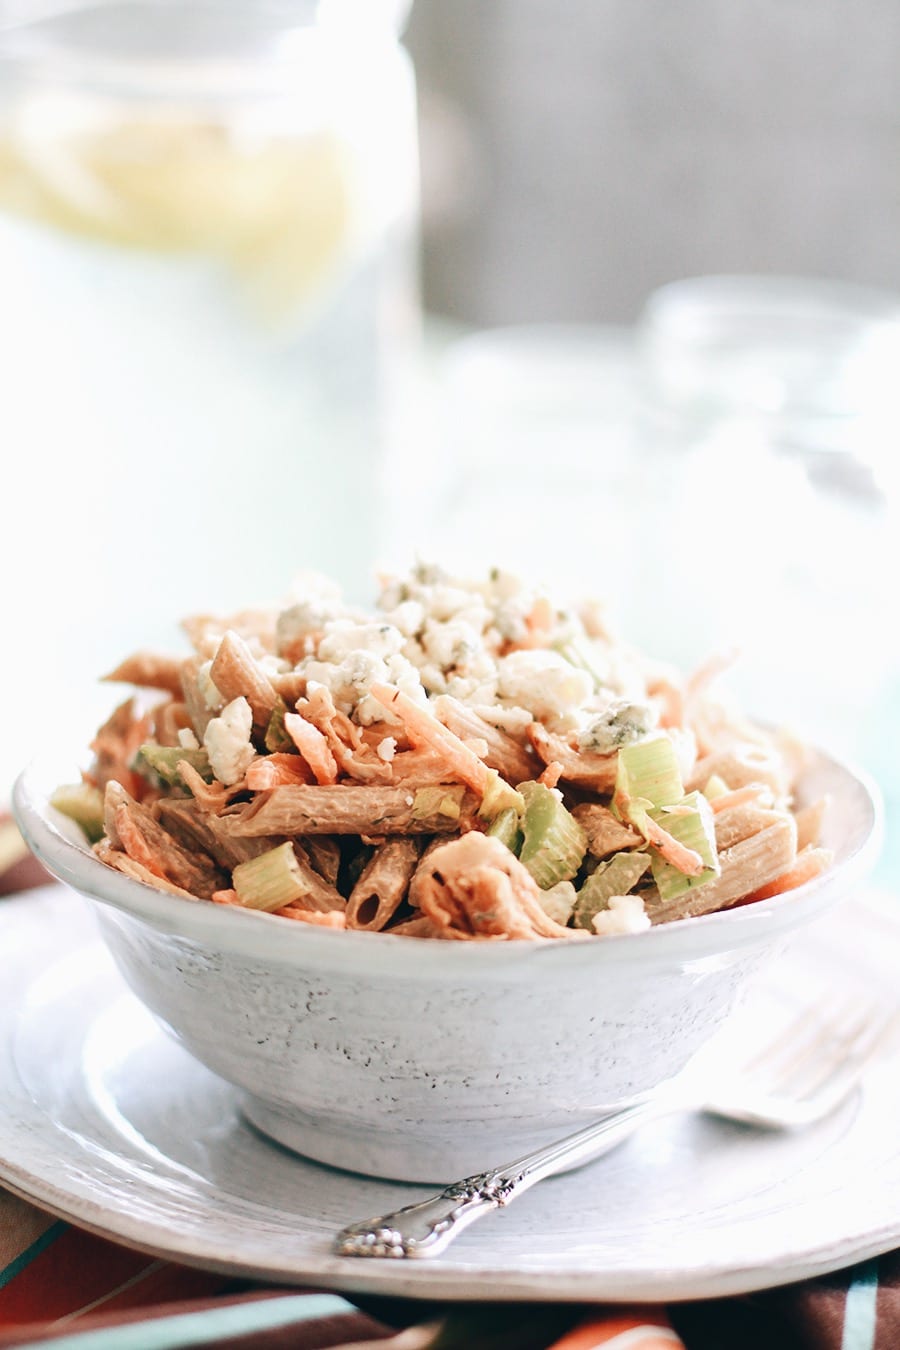 Protein Pasta Salad with Buffalo Chicken and Blue Cheese Crumbles